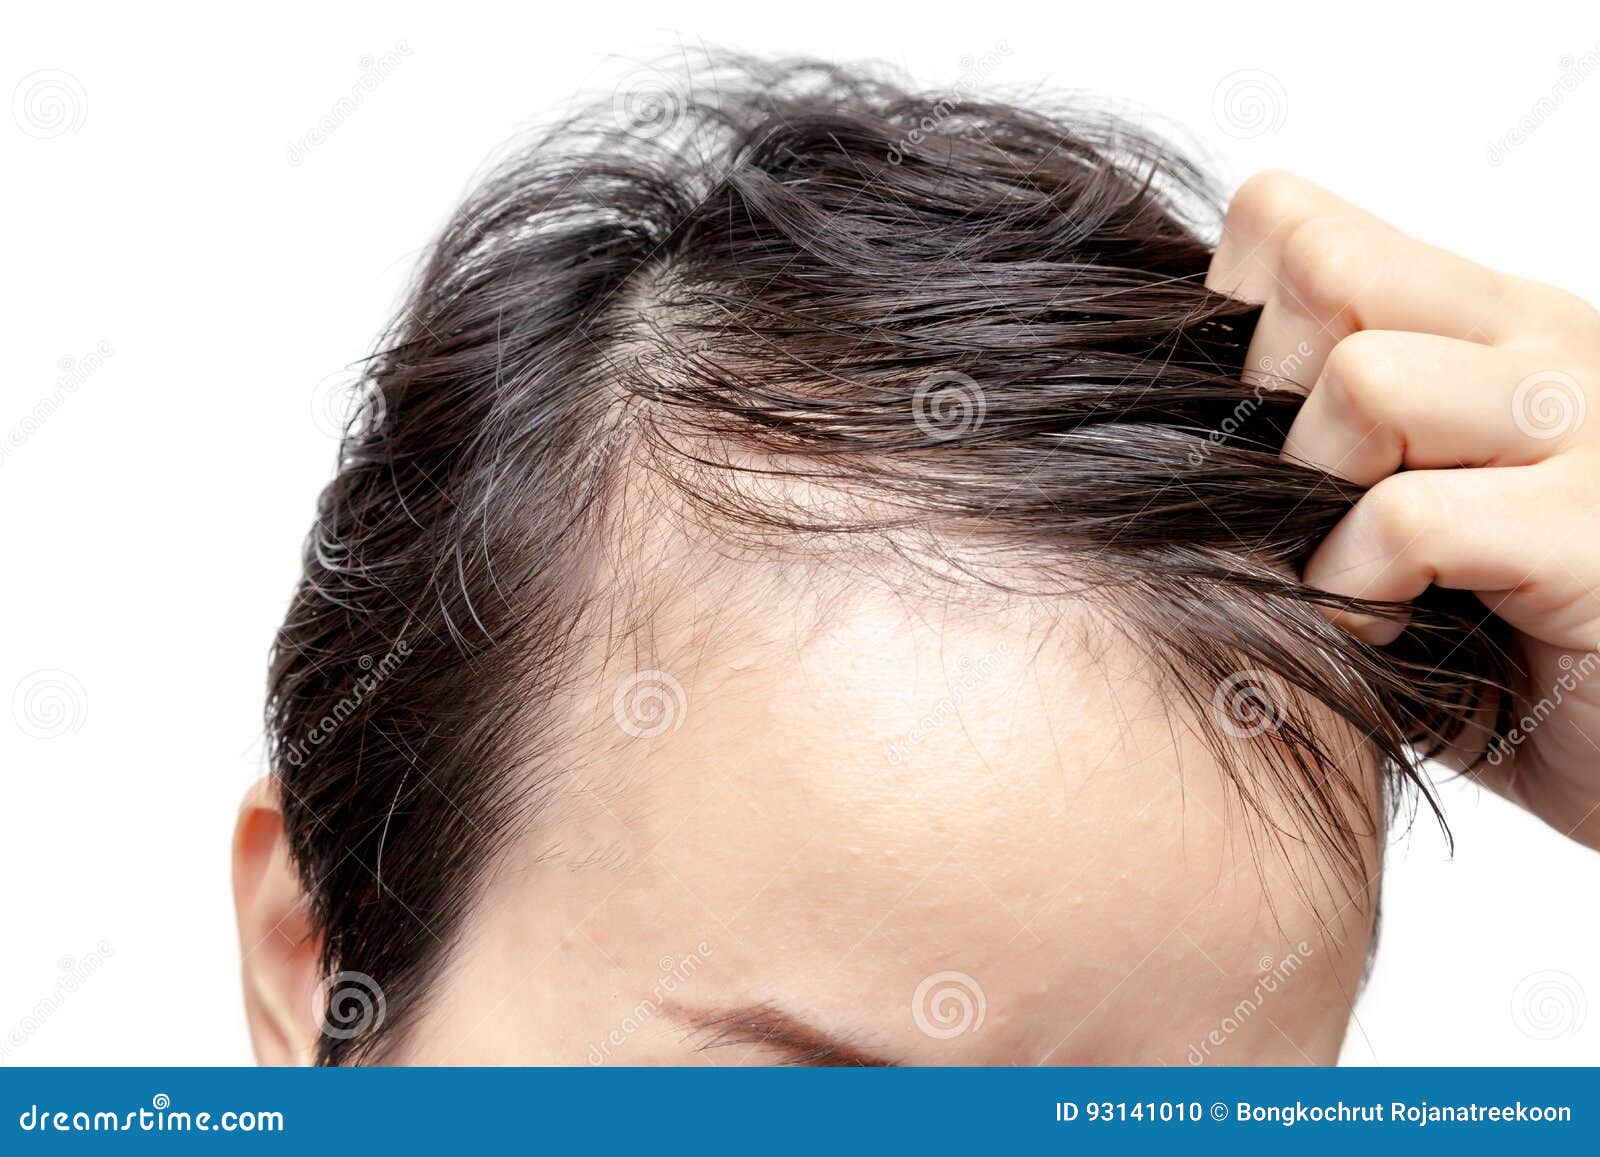 bald man or woman worry about his or her less hairline